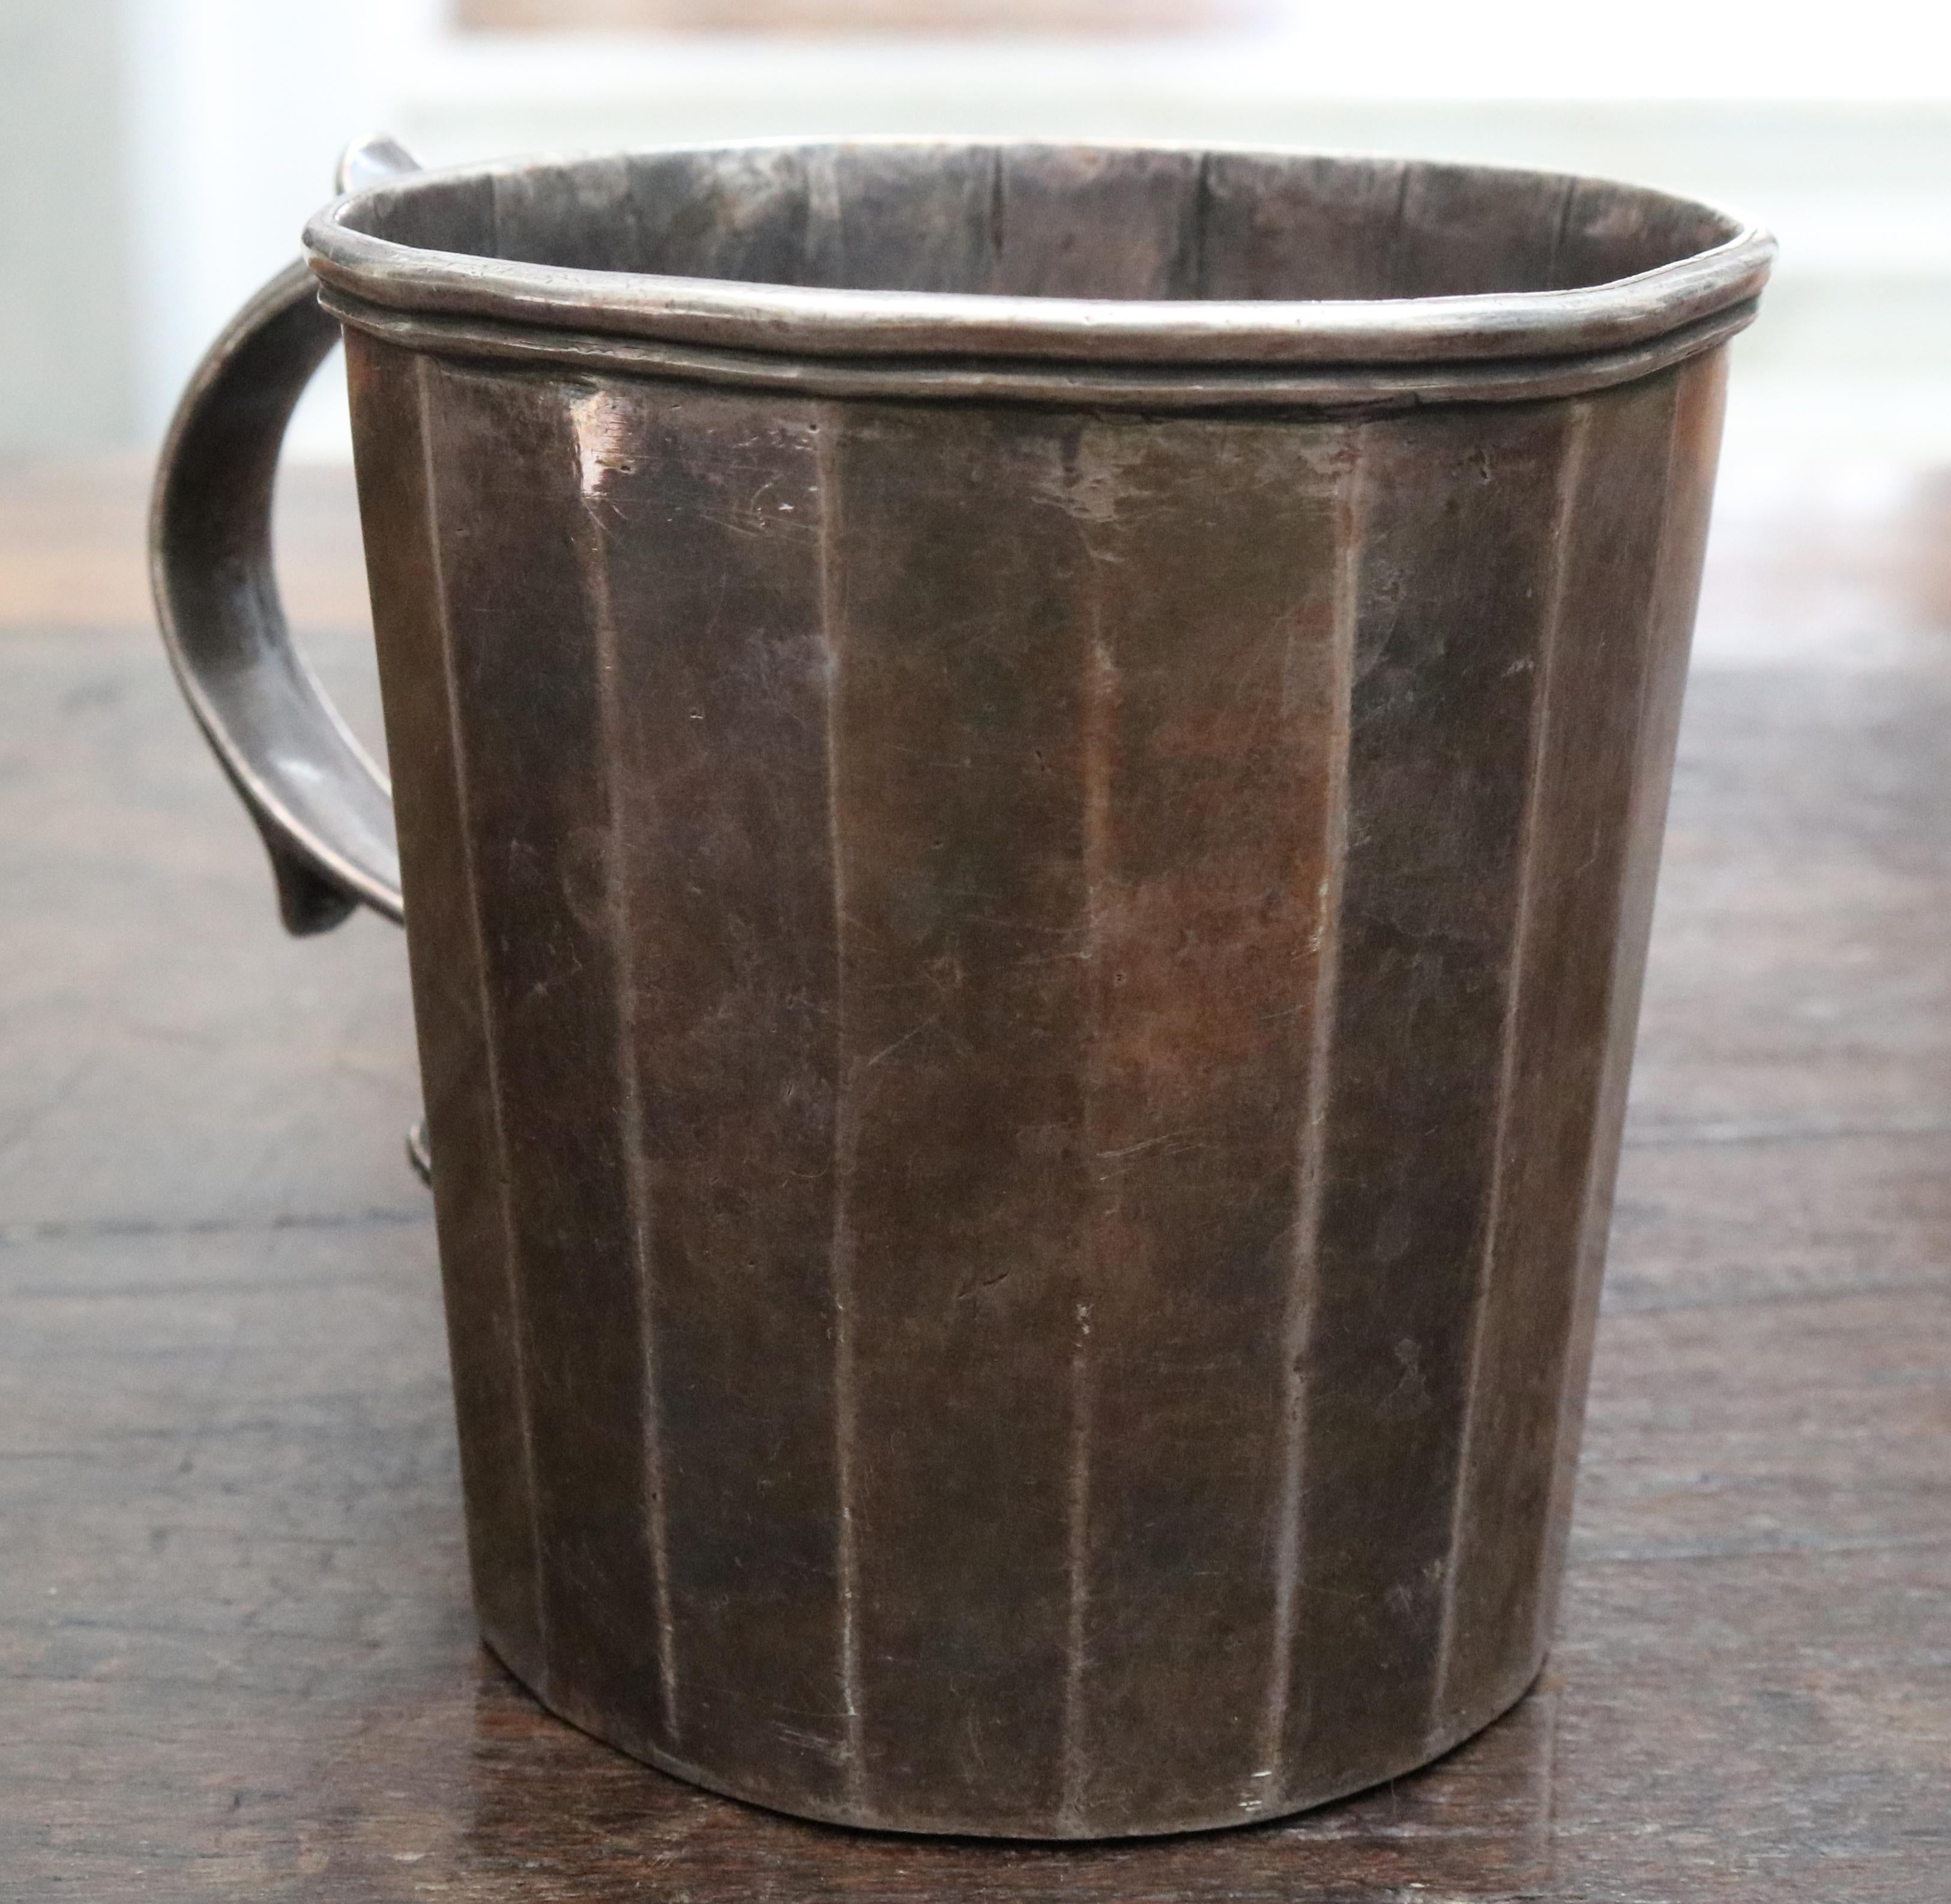 18th century silver cup with handle, possibly Bolivian. 

Total silver by weight: 230 g.